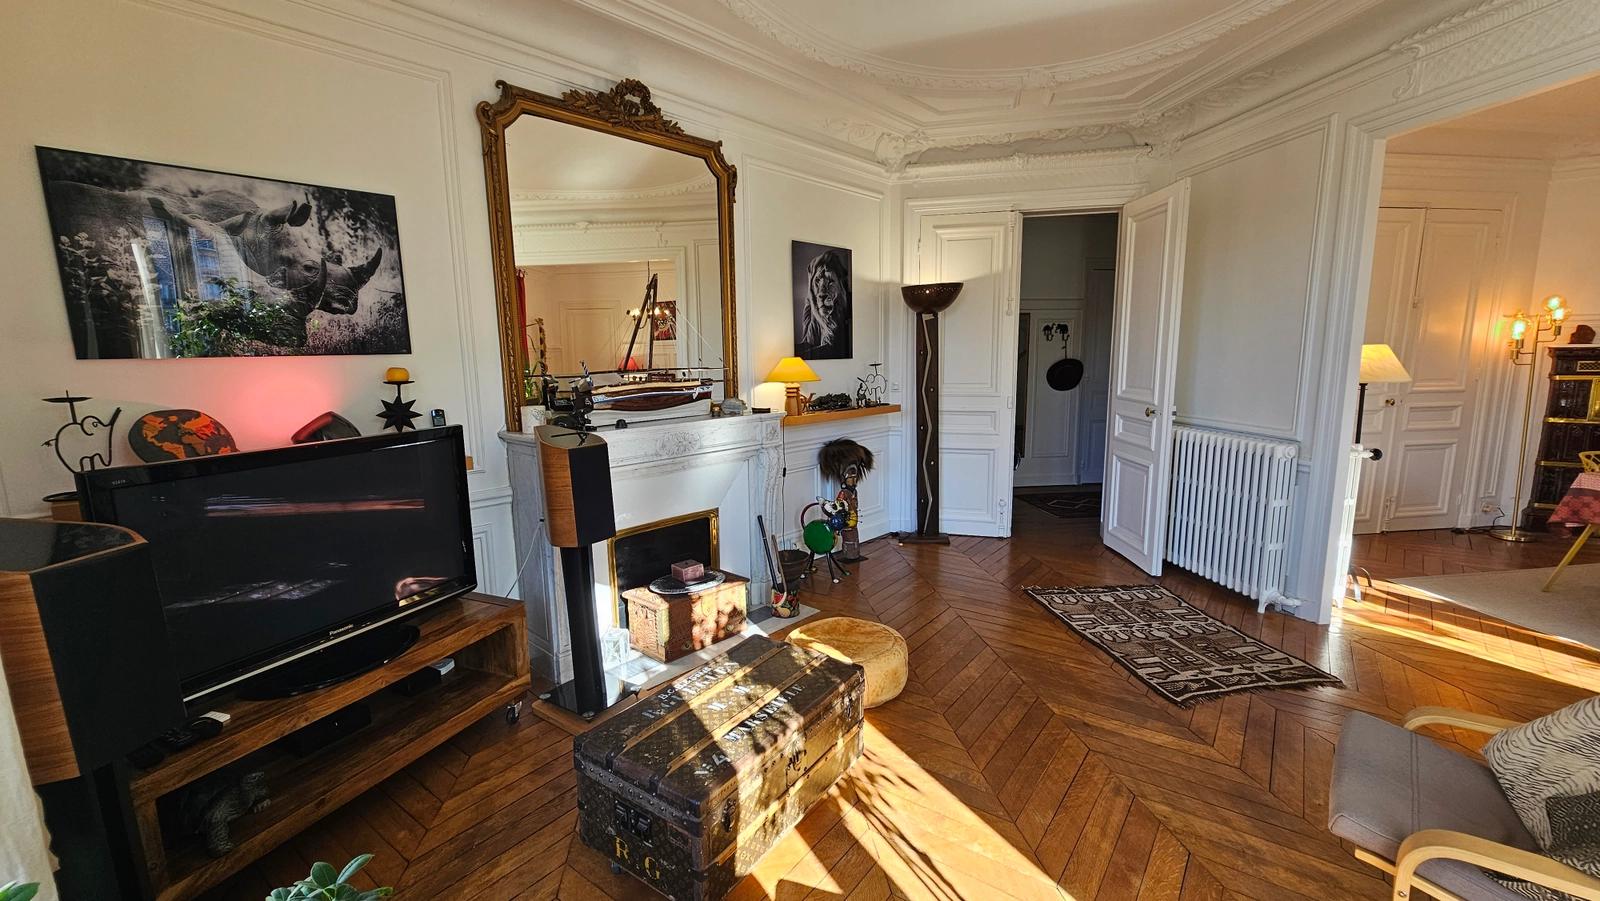 Living room in Haussmannian apartment with exotic decor - 1